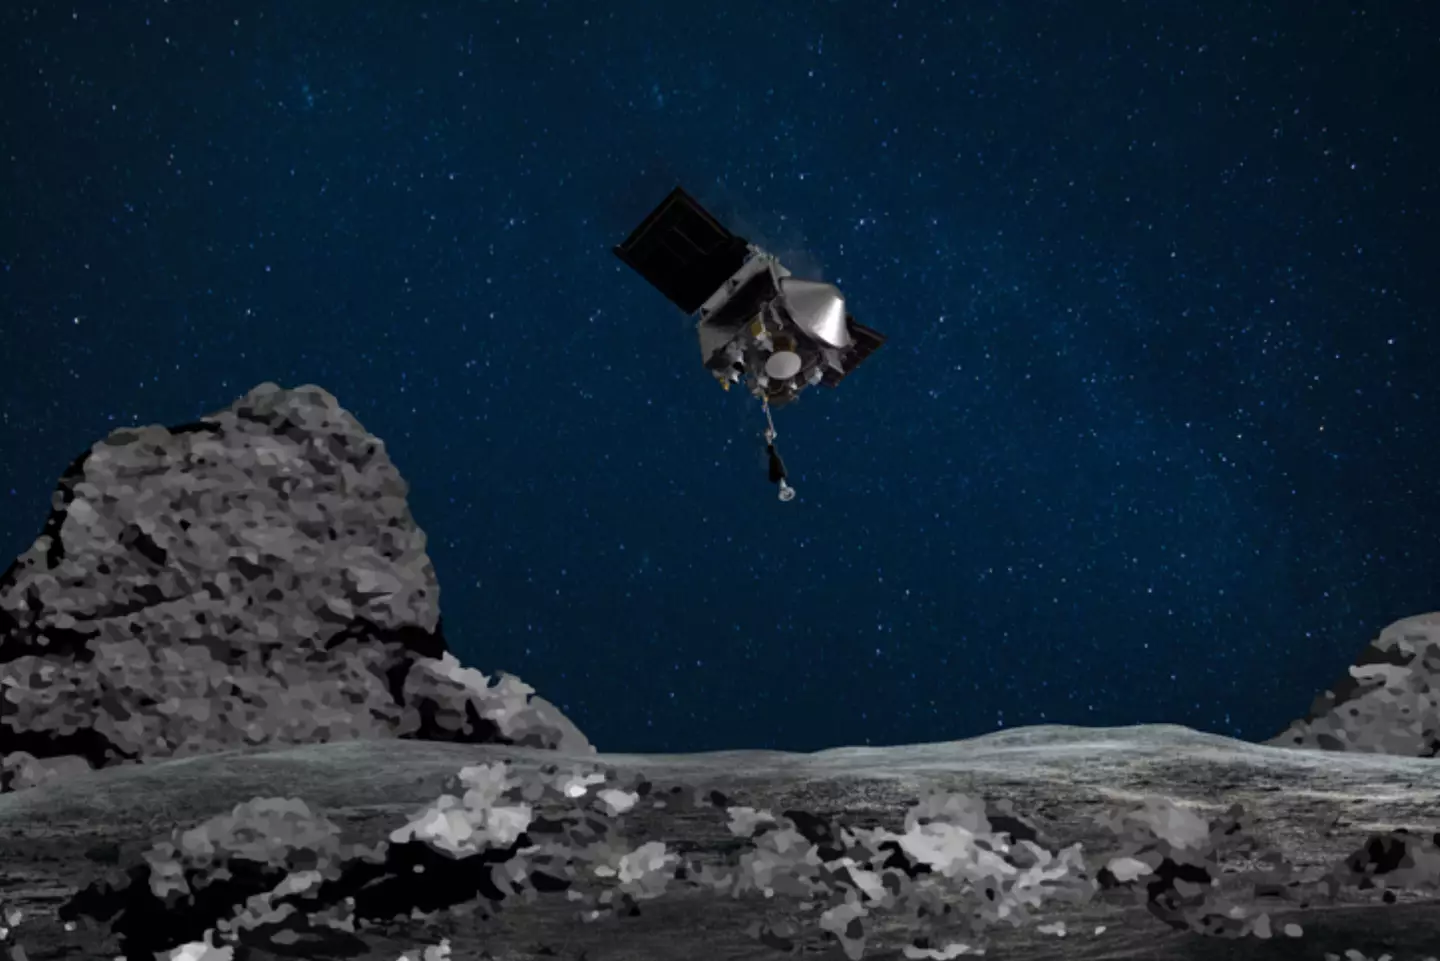 The spacecraft collected rocks and dust from Bennu.